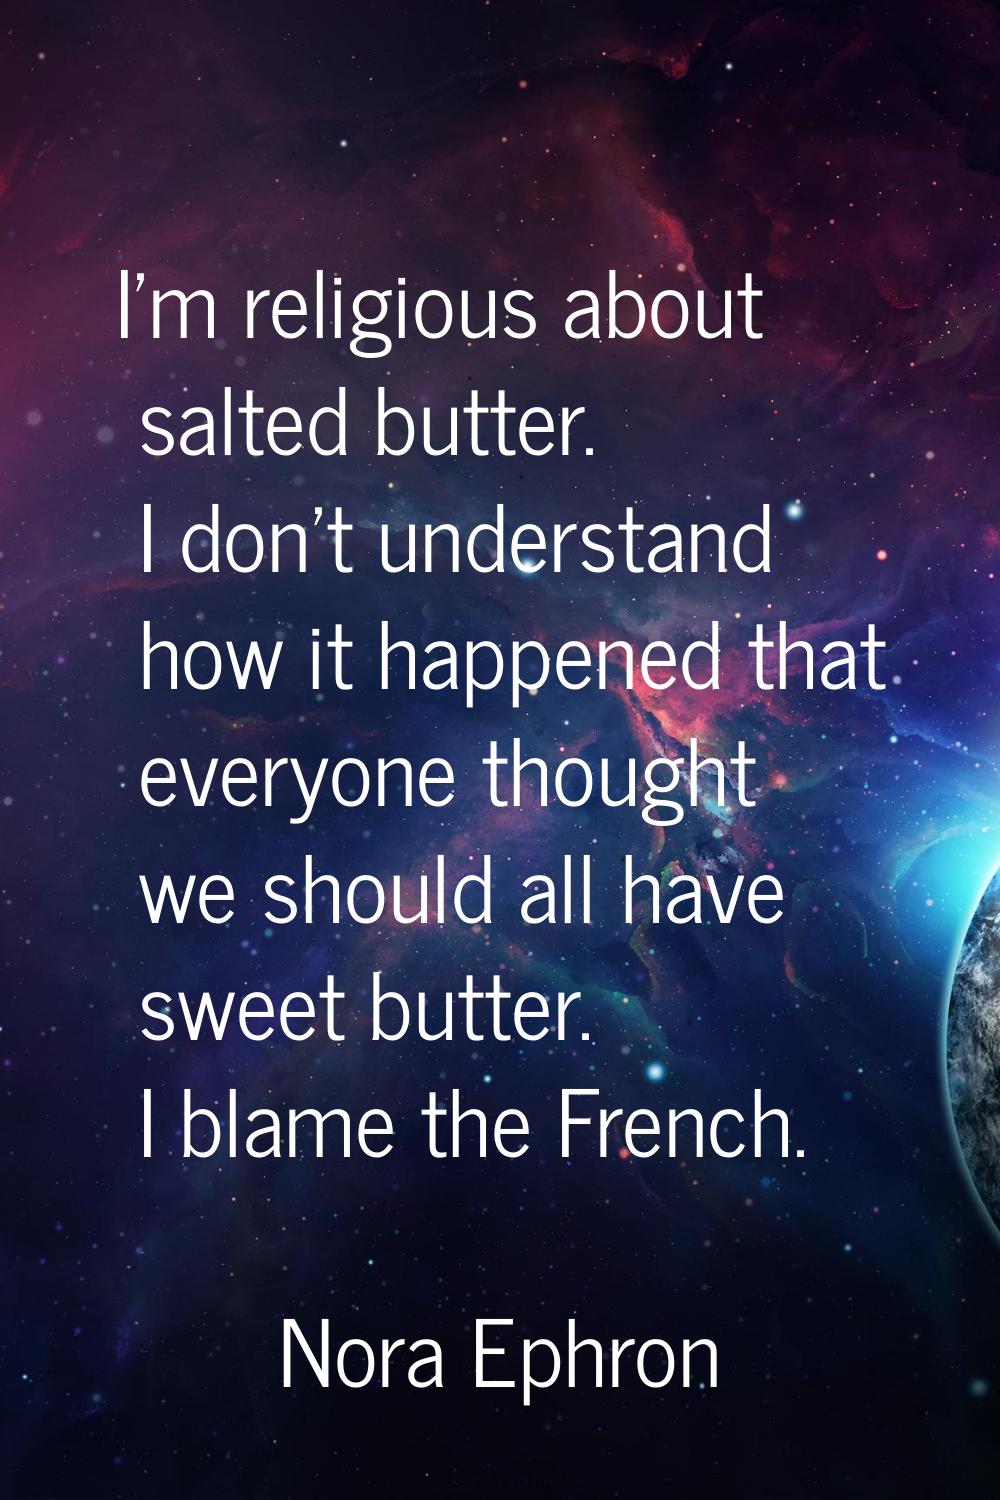 I'm religious about salted butter. I don't understand how it happened that everyone thought we shou